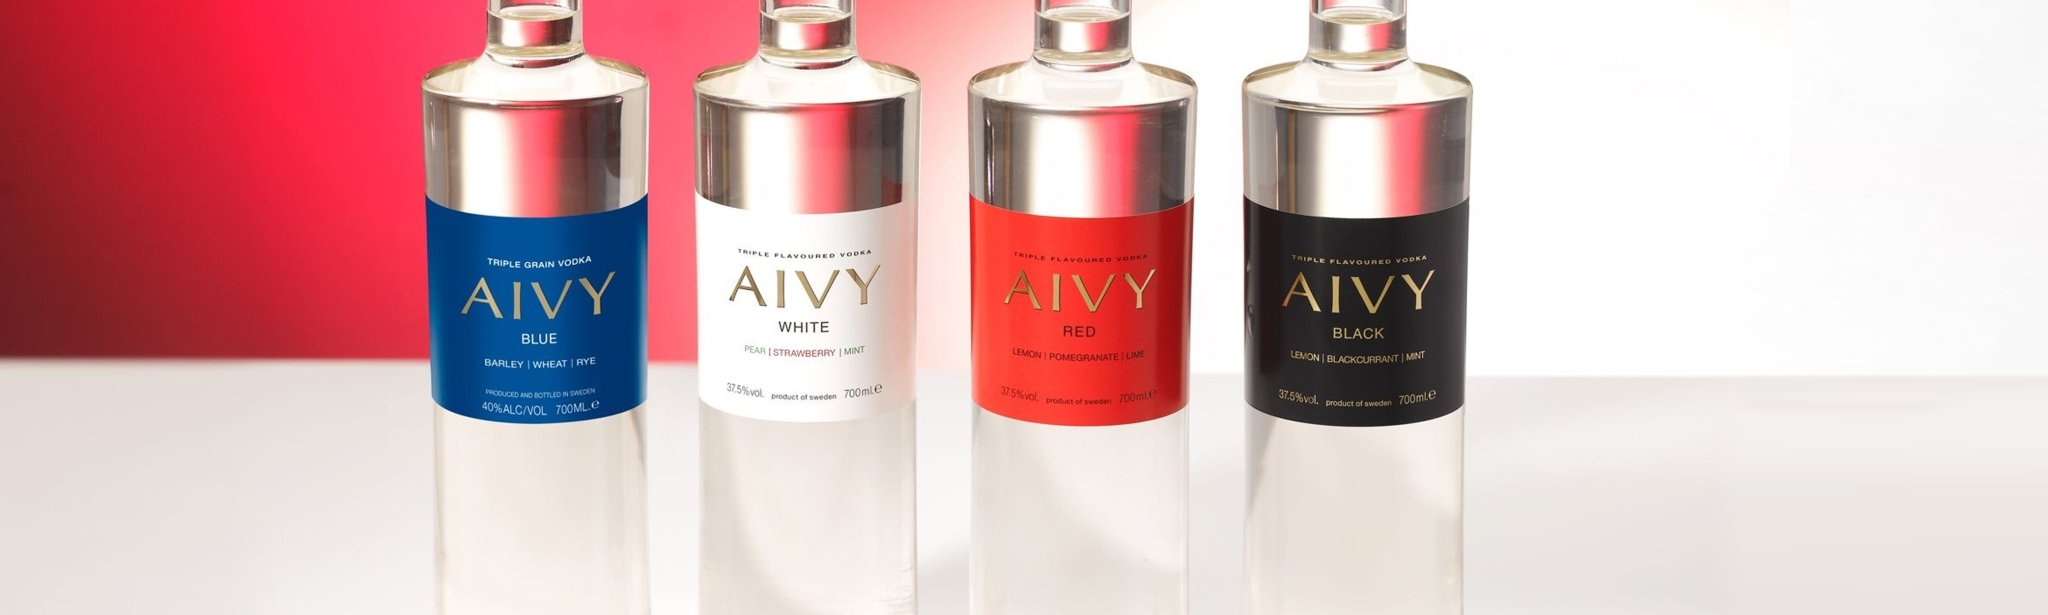 Aivy - The Bottle Club